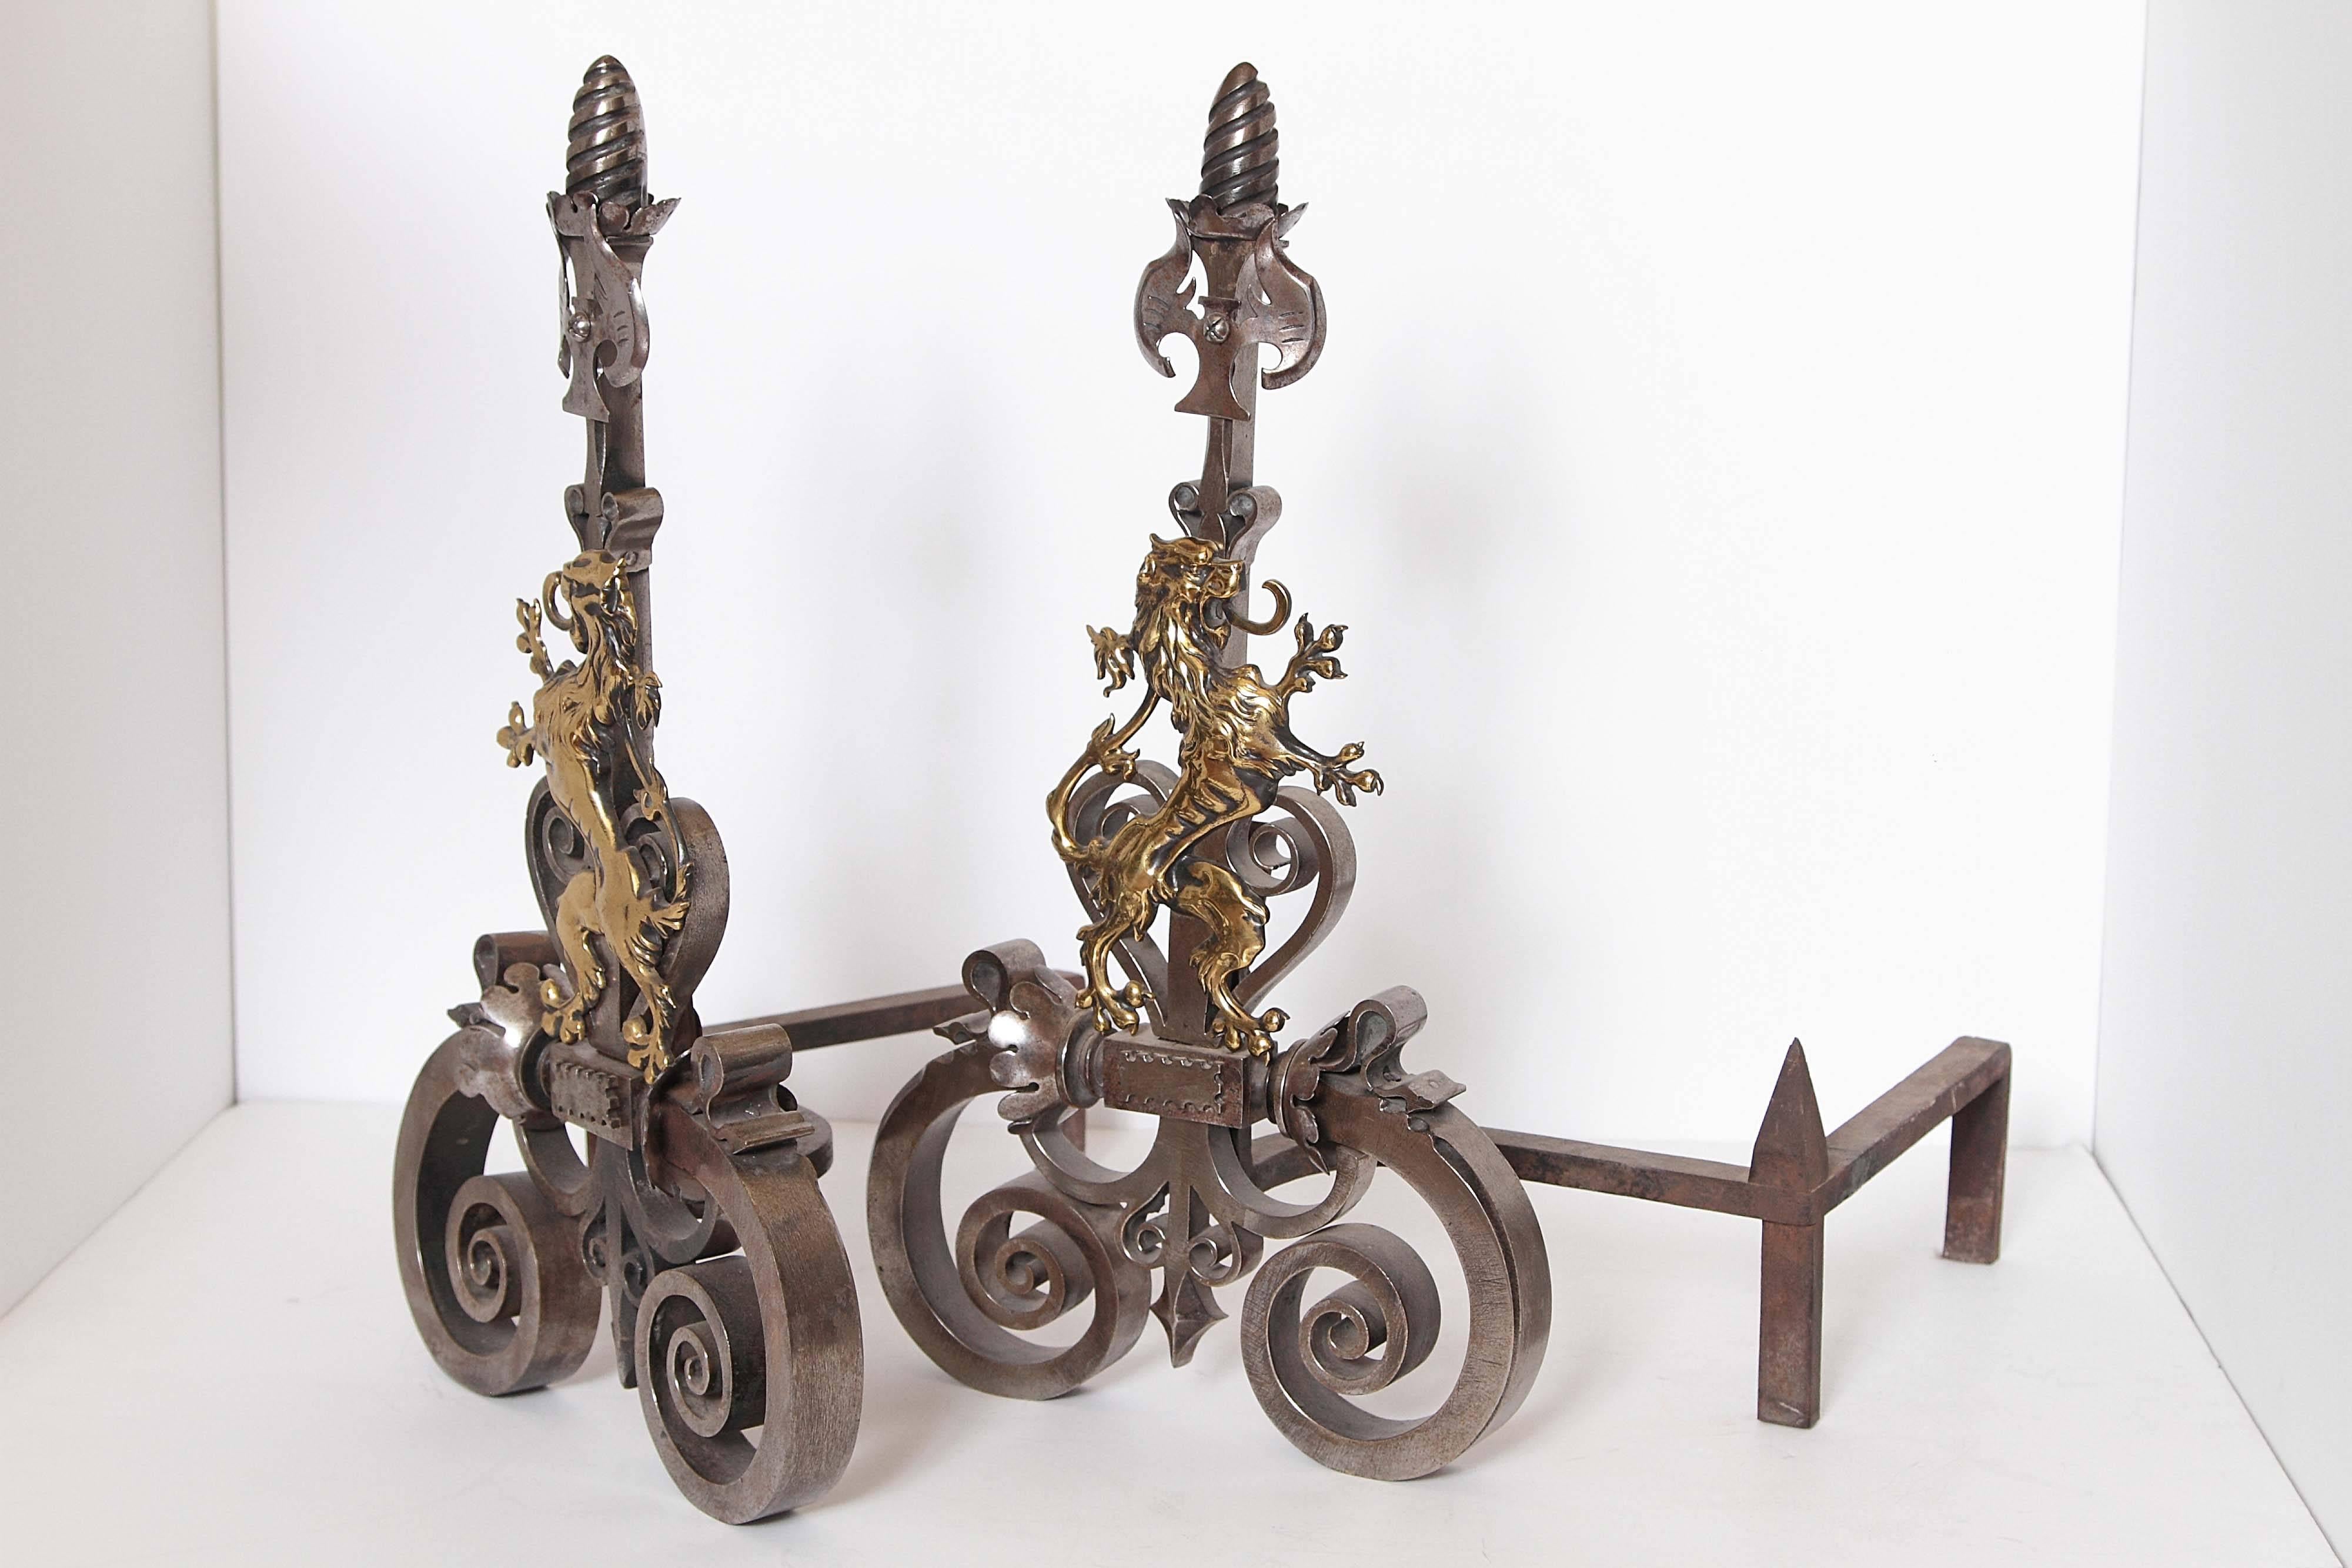 A beautiful pair of hand-wrought andirons with polished bronze dragons.